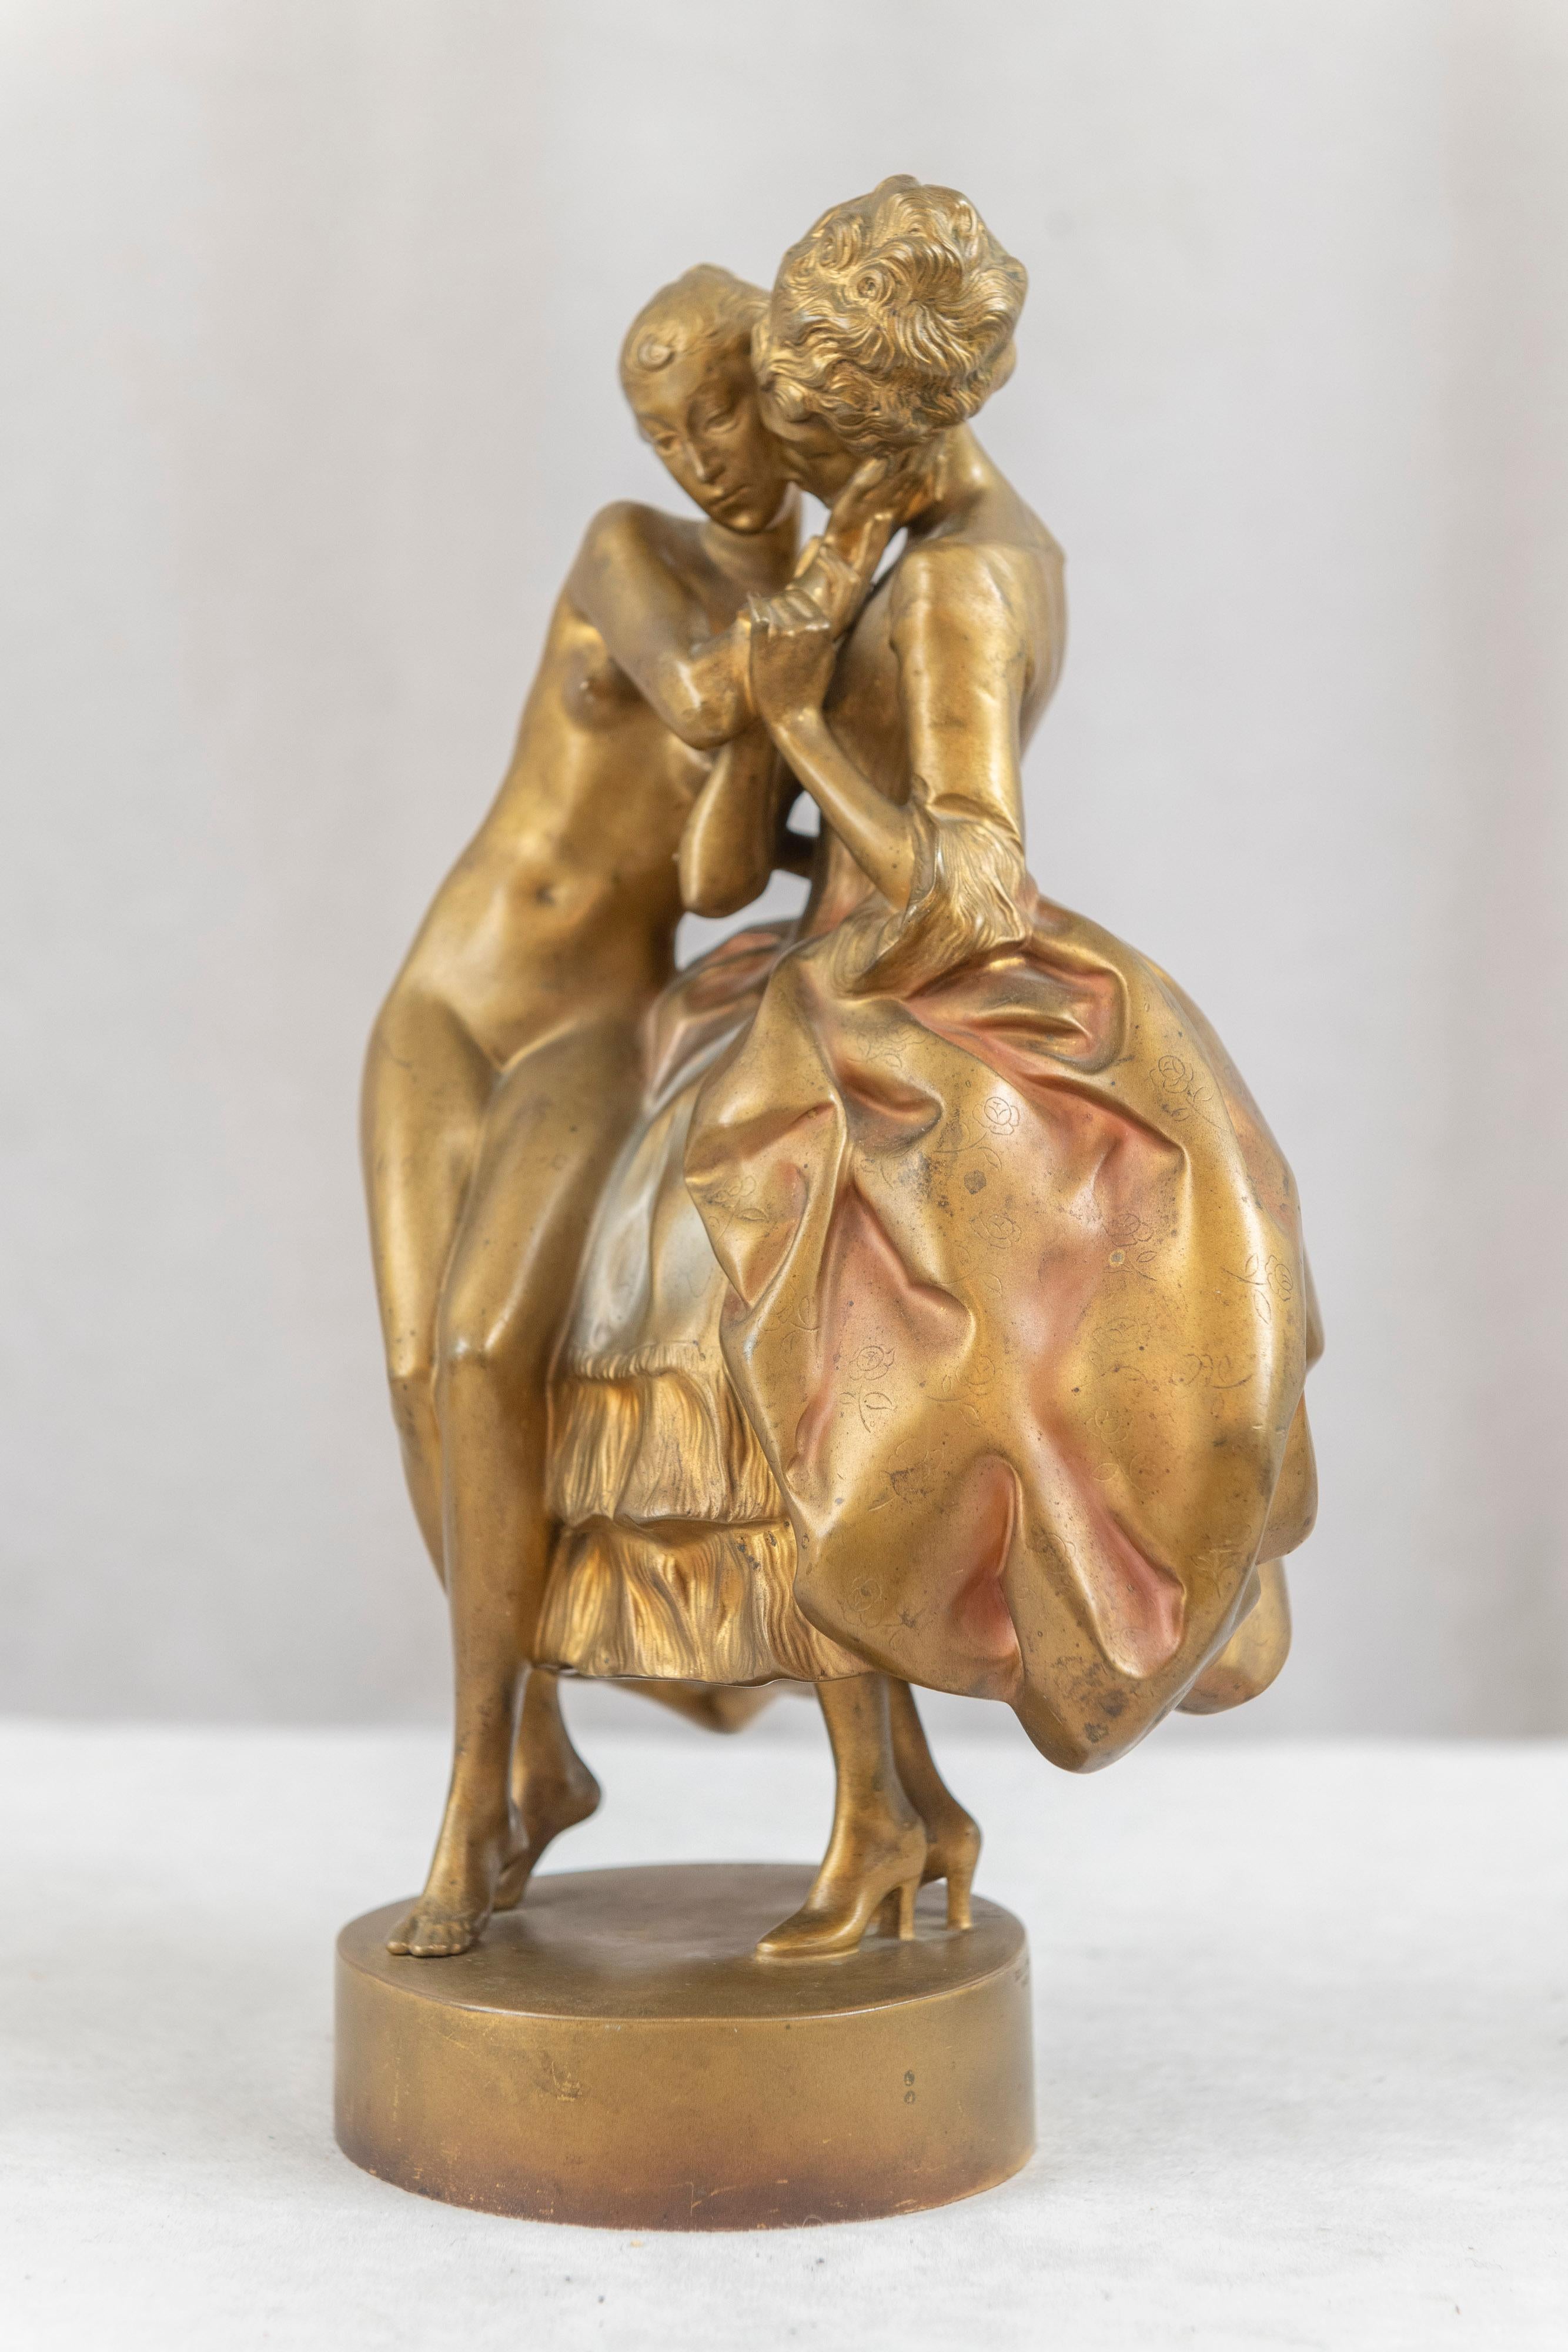  This beautiful, warm and loving bronze depicts 2 women embracing. One is dressed very formal and dashing while her partner is nude. The style and especially the faces are pure art deco. The bronze still has the rich gilt finish with small areas